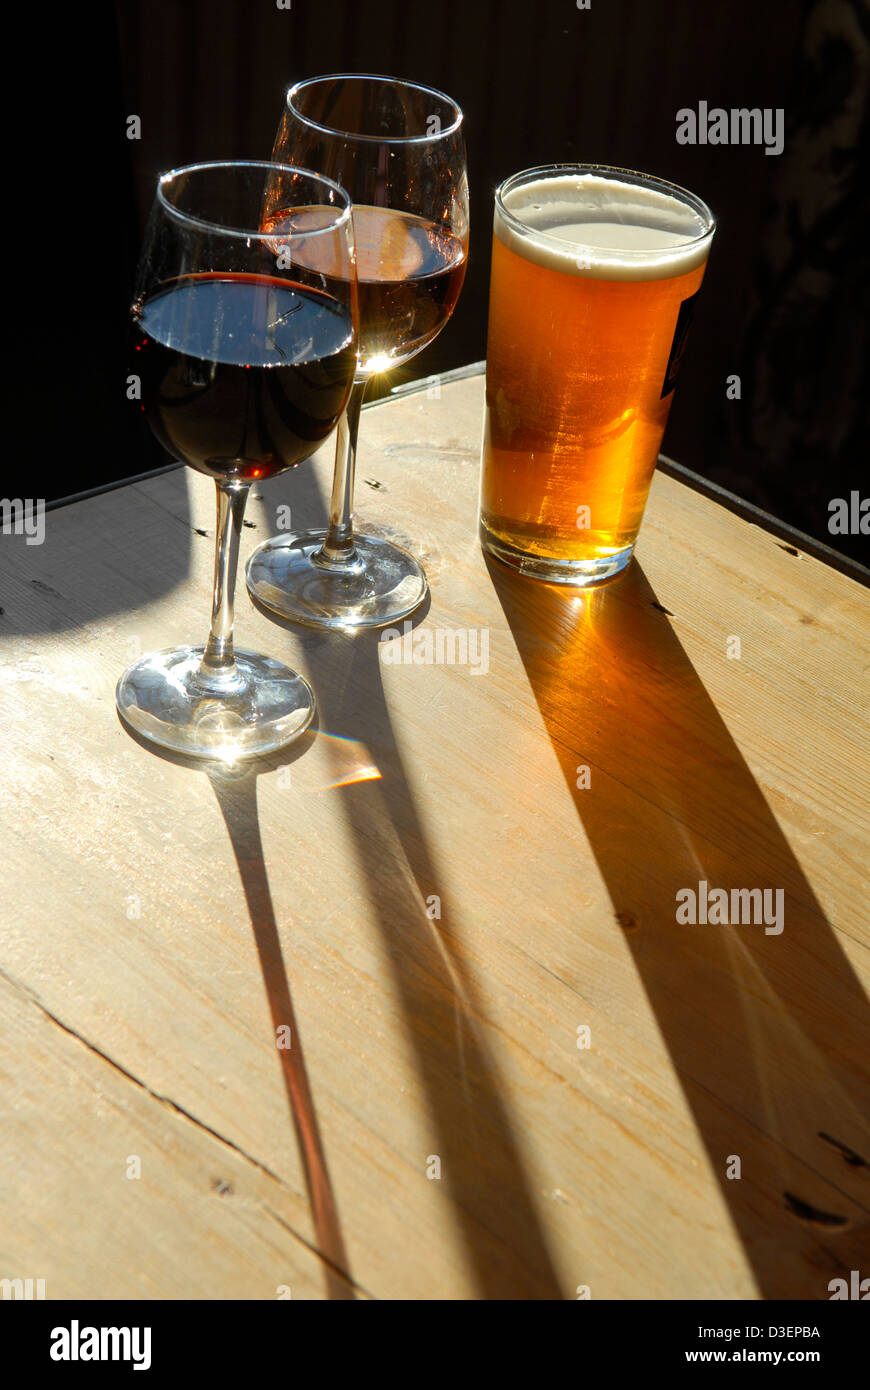 A pint of beer and two glasses of wine in a Shropshire pub, England Stock Photo